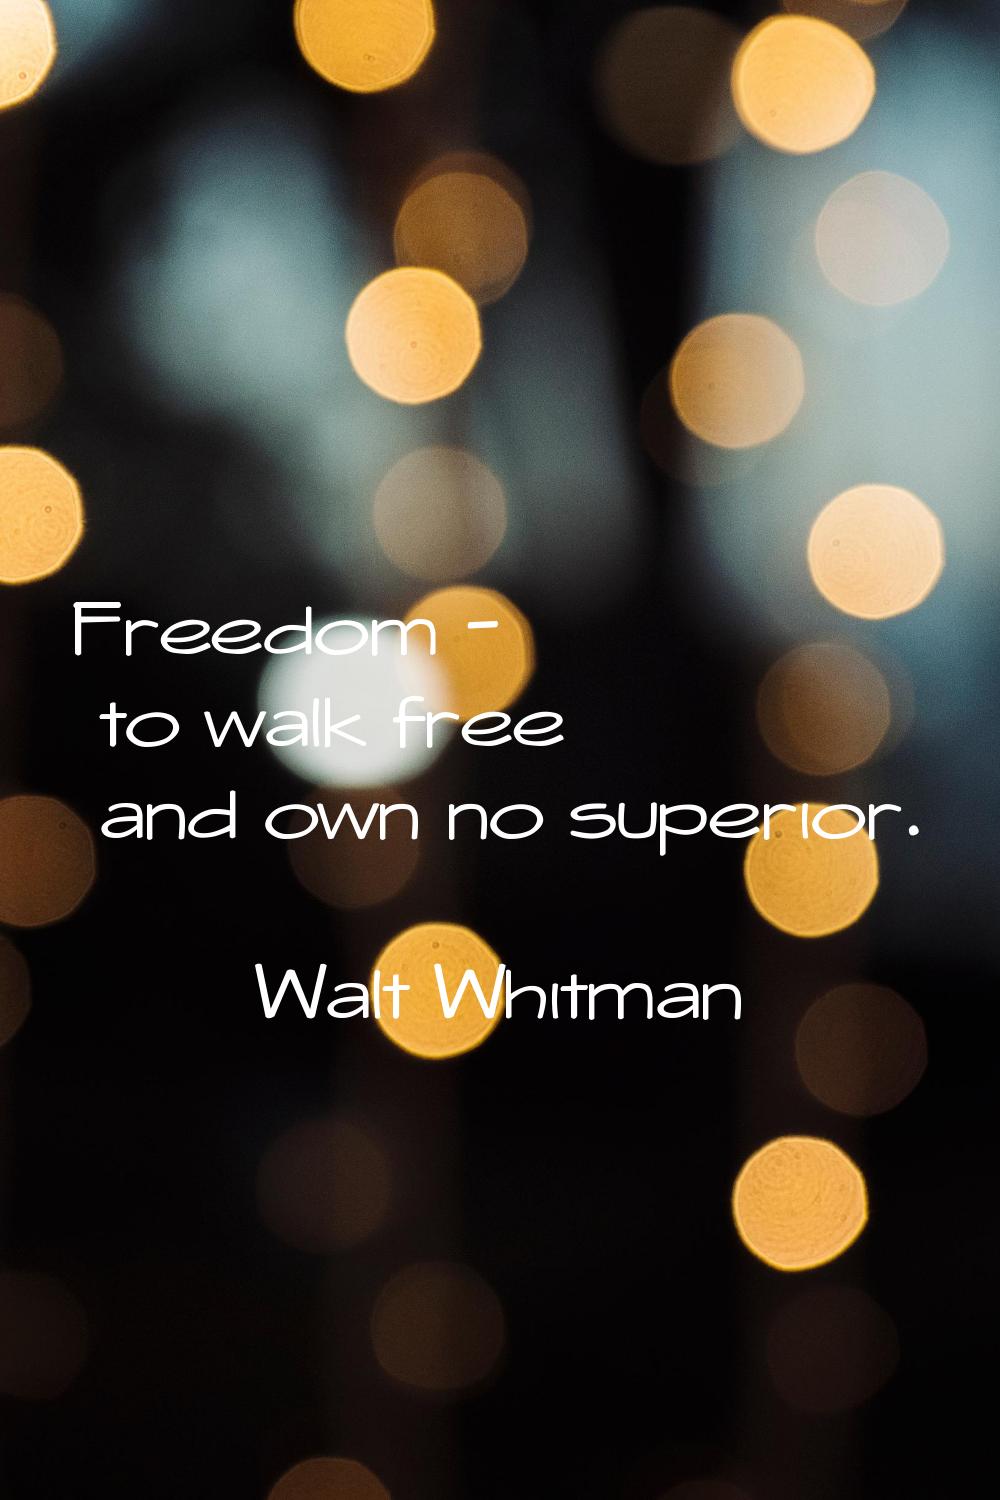 Freedom - to walk free and own no superior.